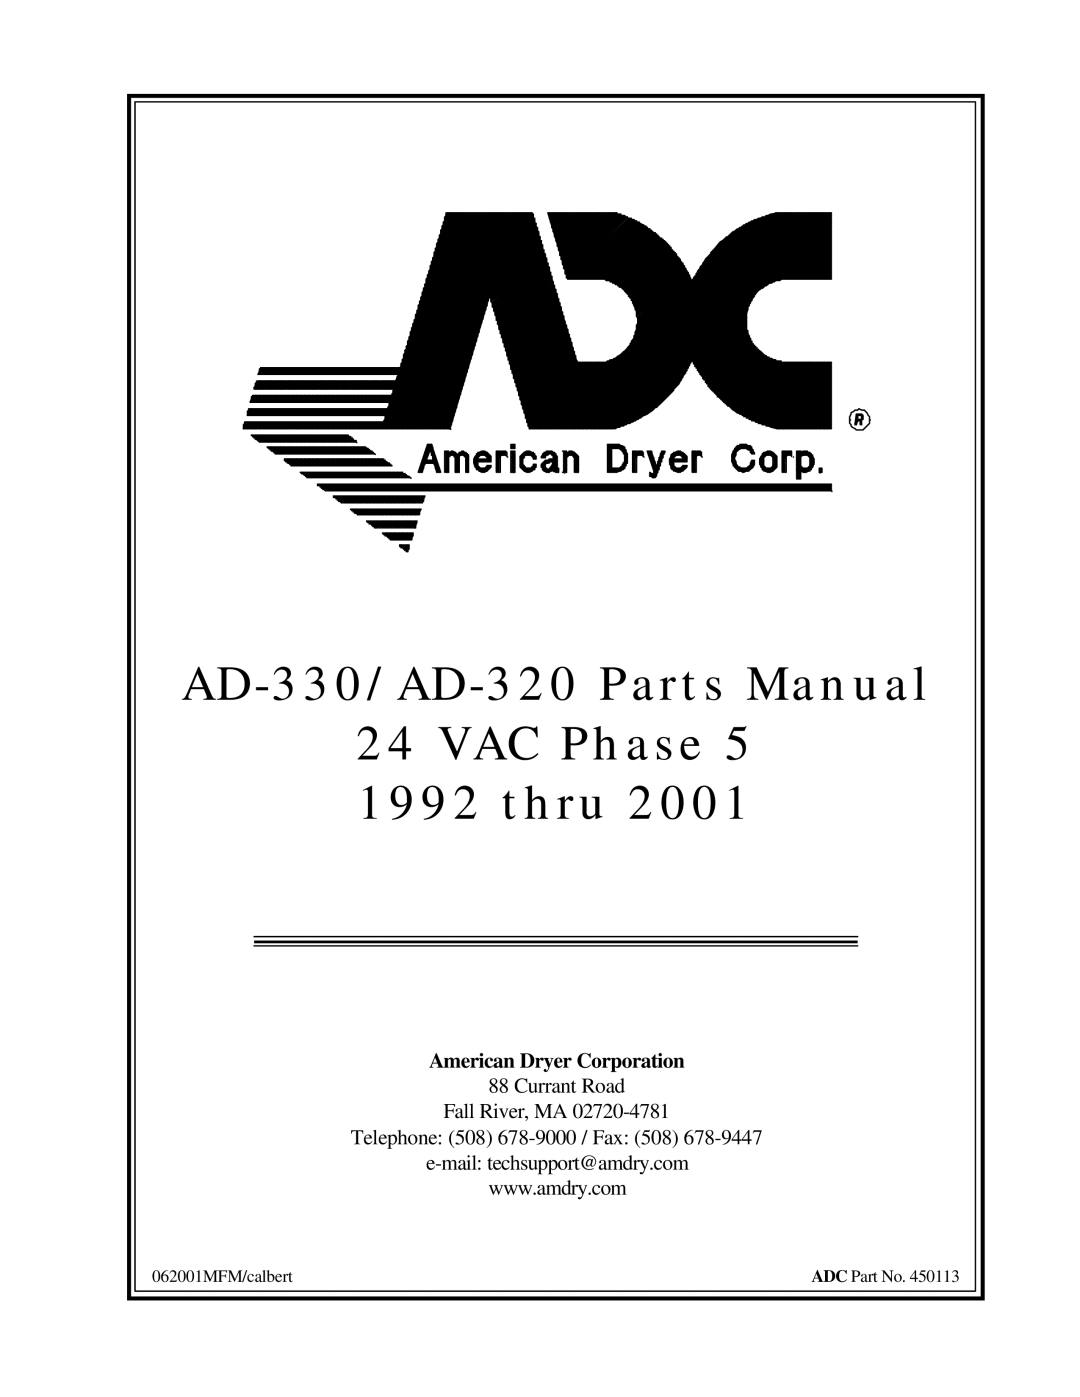 American Dryer Corp AD-330, AD-320 manual VAC Phase 